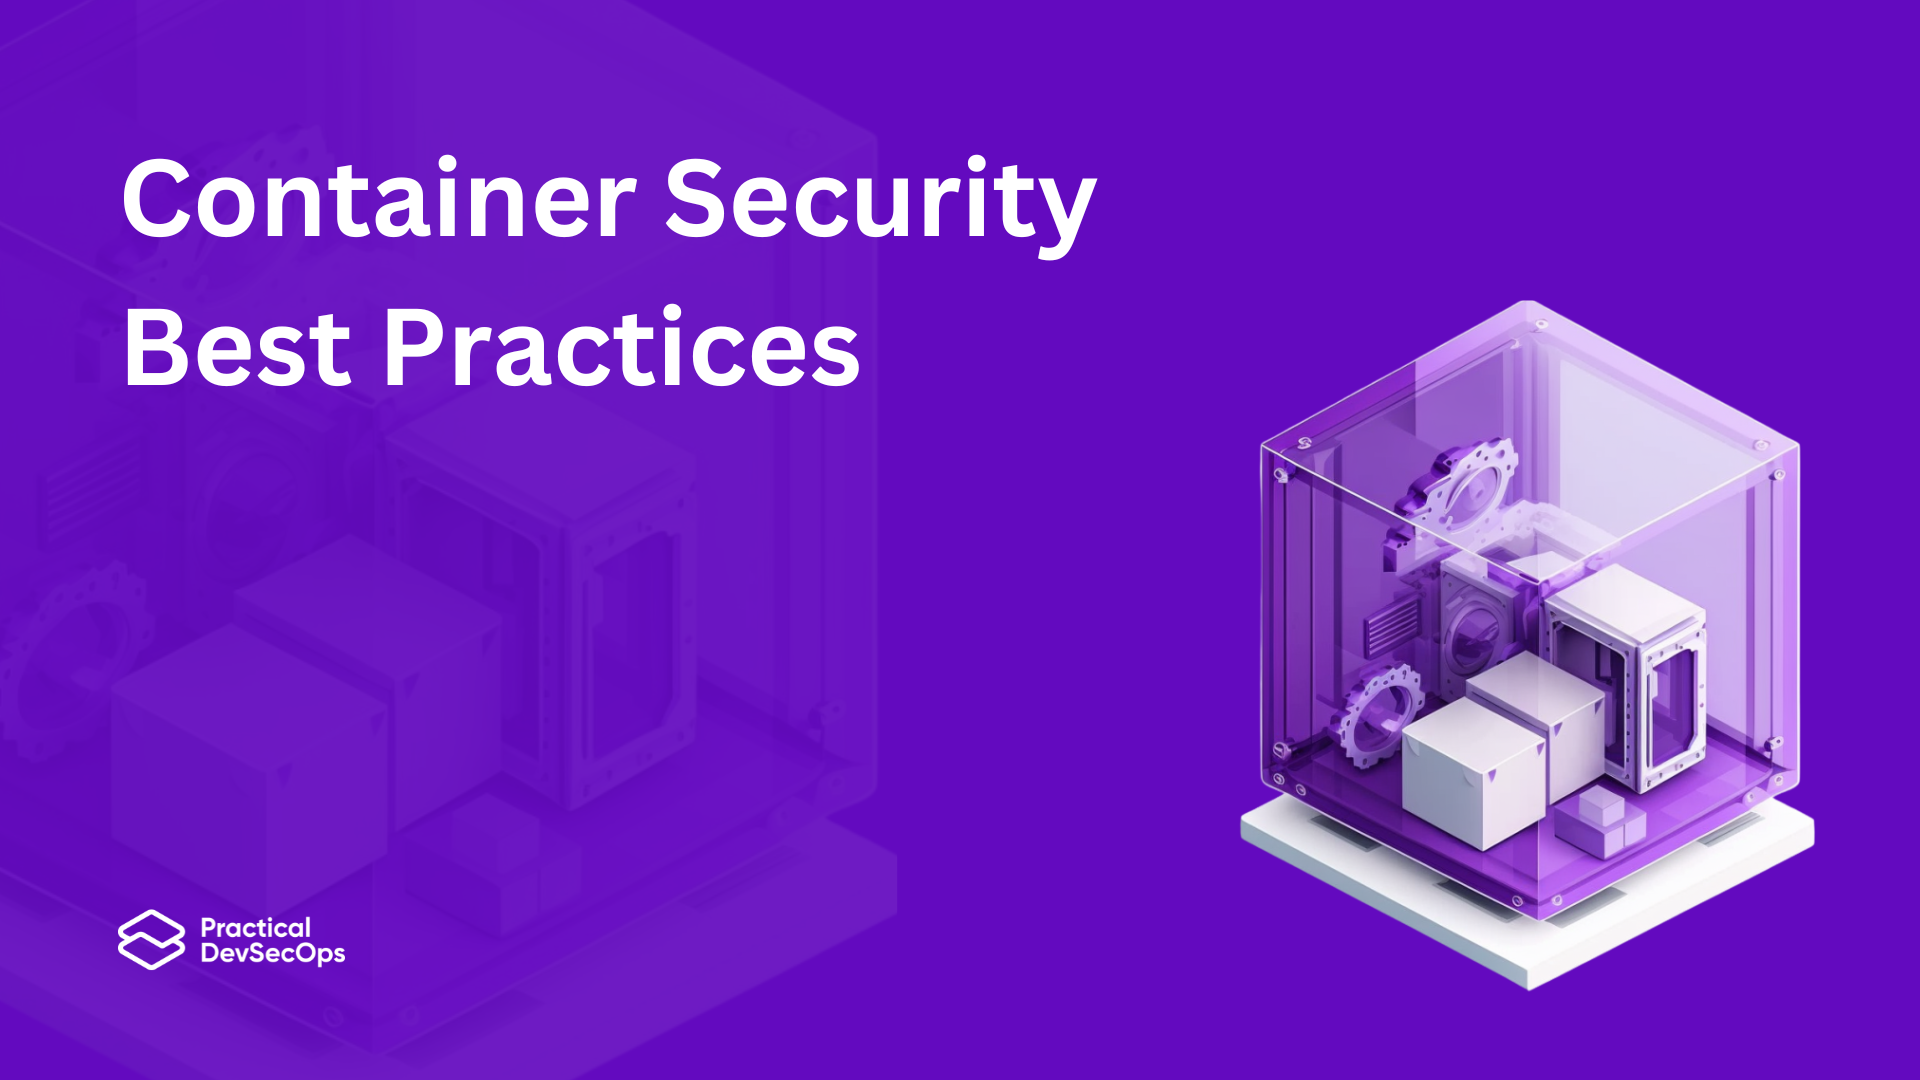 Container Security best practices